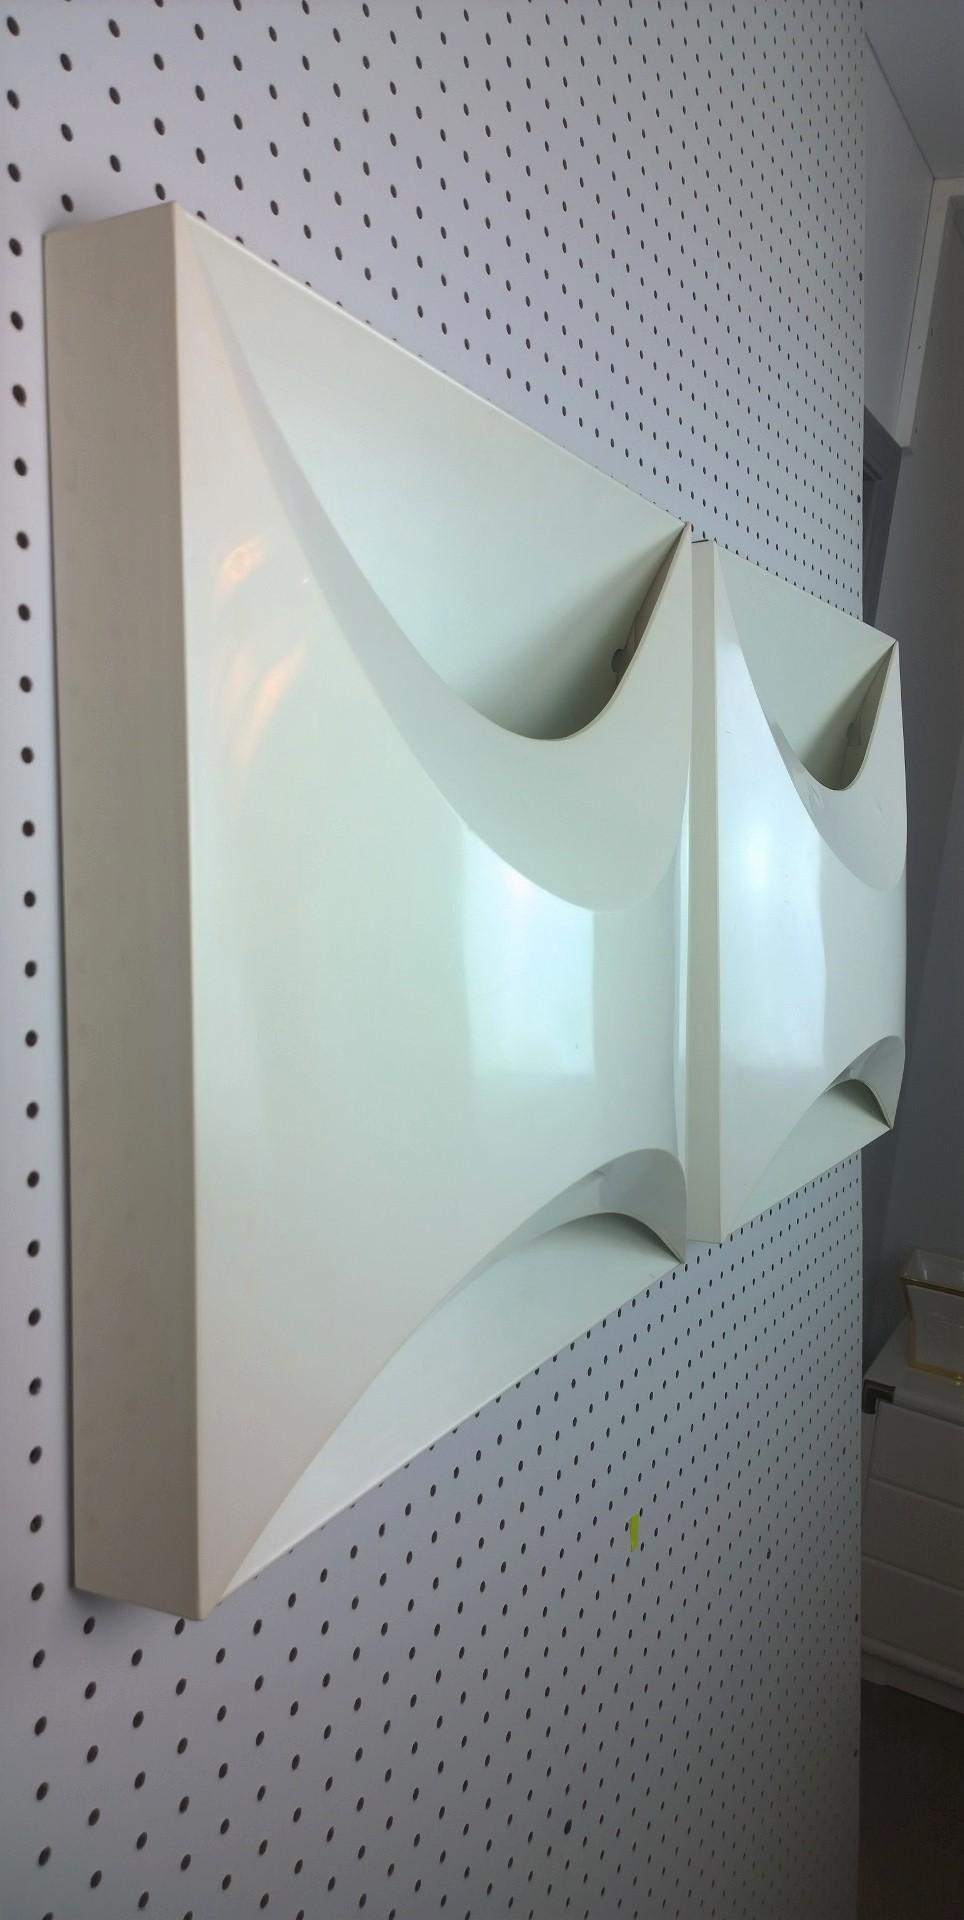 Pair of Modernist Square RAAK Amsterdam White Sconces / Flushmount Lighting In Good Condition For Sale In Houston, TX